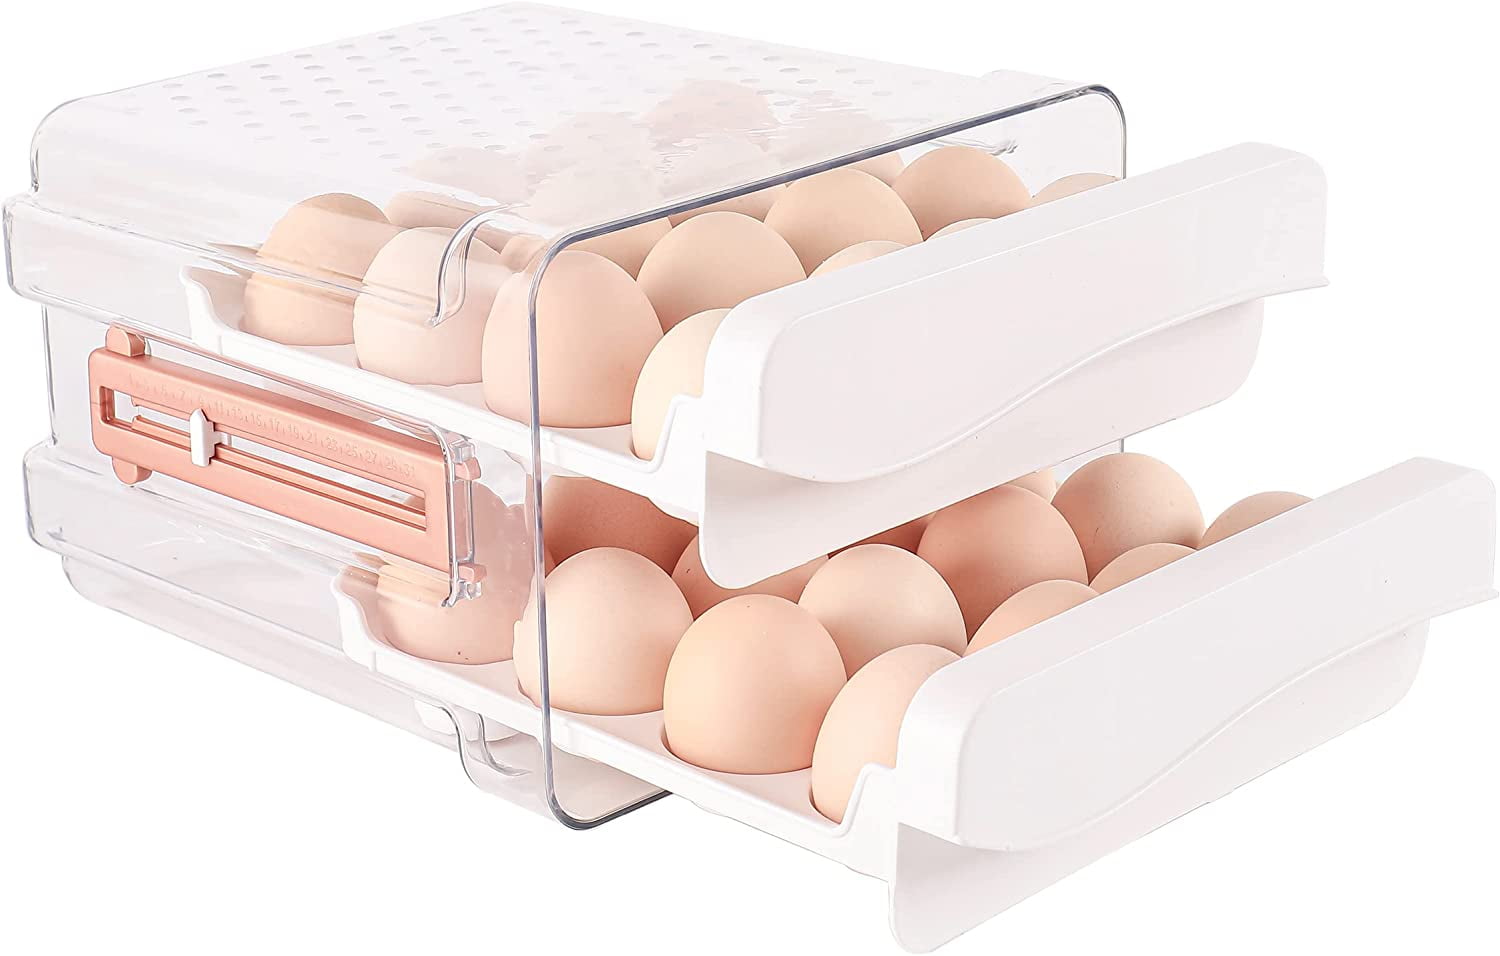 Dropship Egg Container Holder For Refrigerator Double Layer Egg Storage Box  With Lid Automatic Rolling Egg Box Organizer Bin Tray Rack 36 Eggs to Sell  Online at a Lower Price